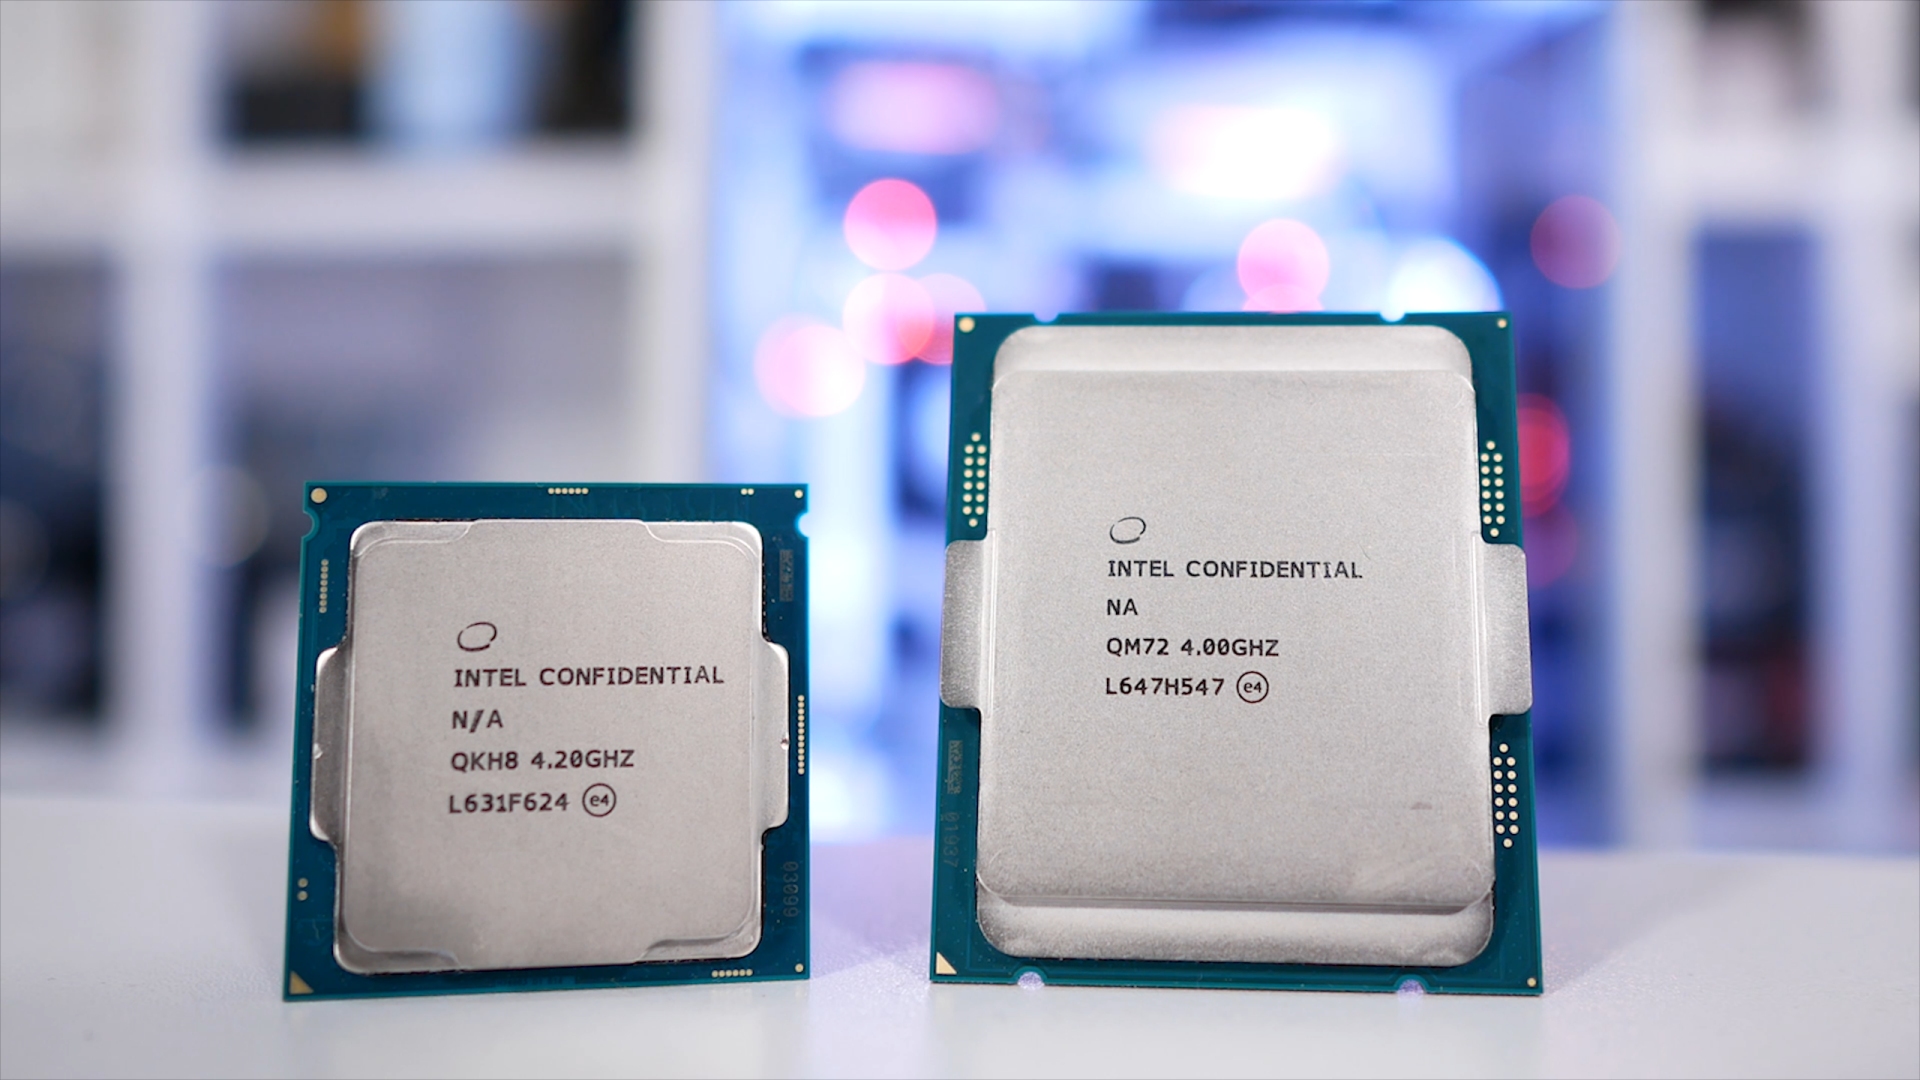 Intel discontinues Kaby Lake-X processors less than a year after launch